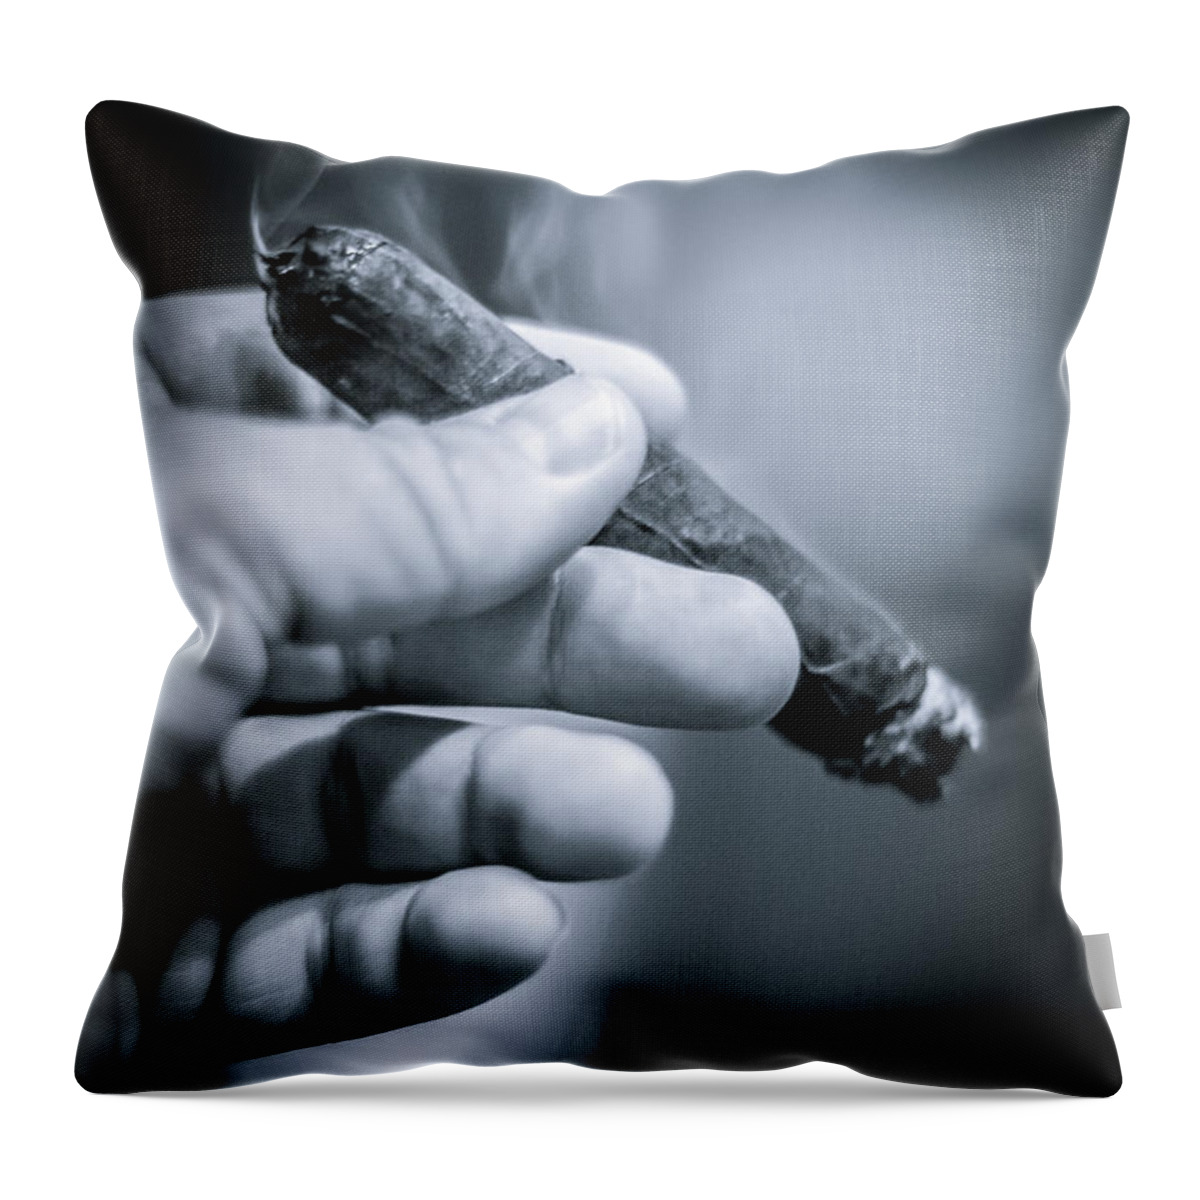 Relaxing With A Cigar Throw Pillow featuring the photograph Relaxing with a Cigar by David Morefield